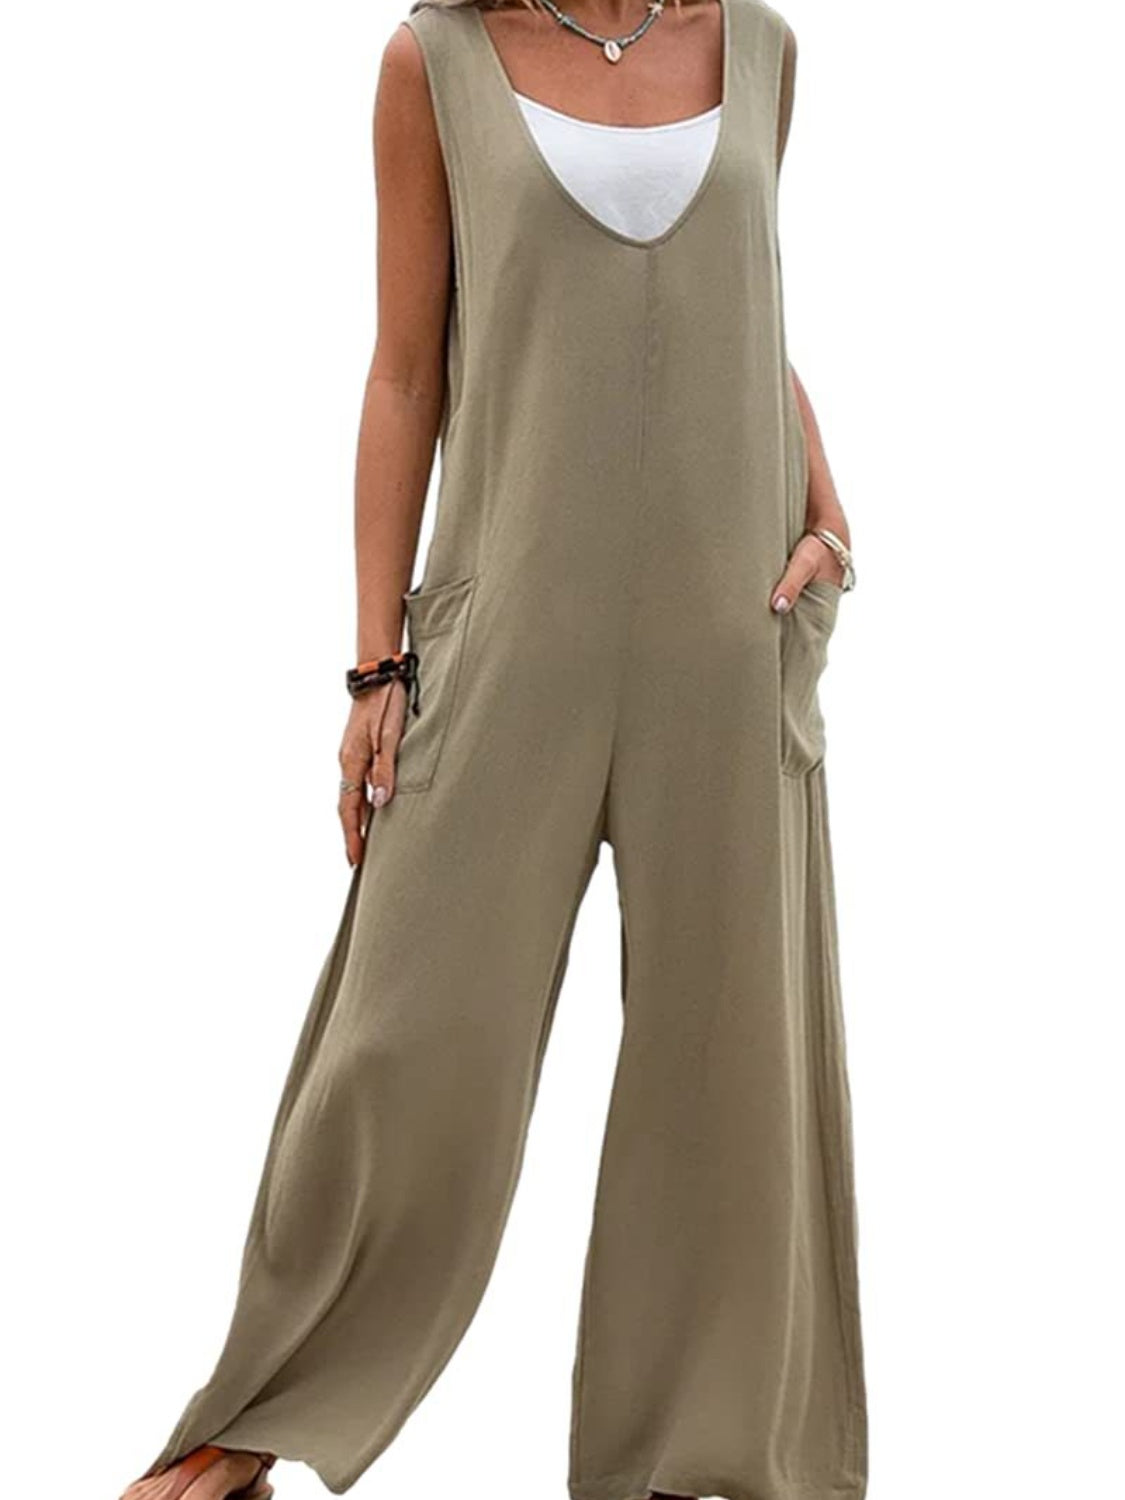 Wide Strap Jumpsuit with Pockets